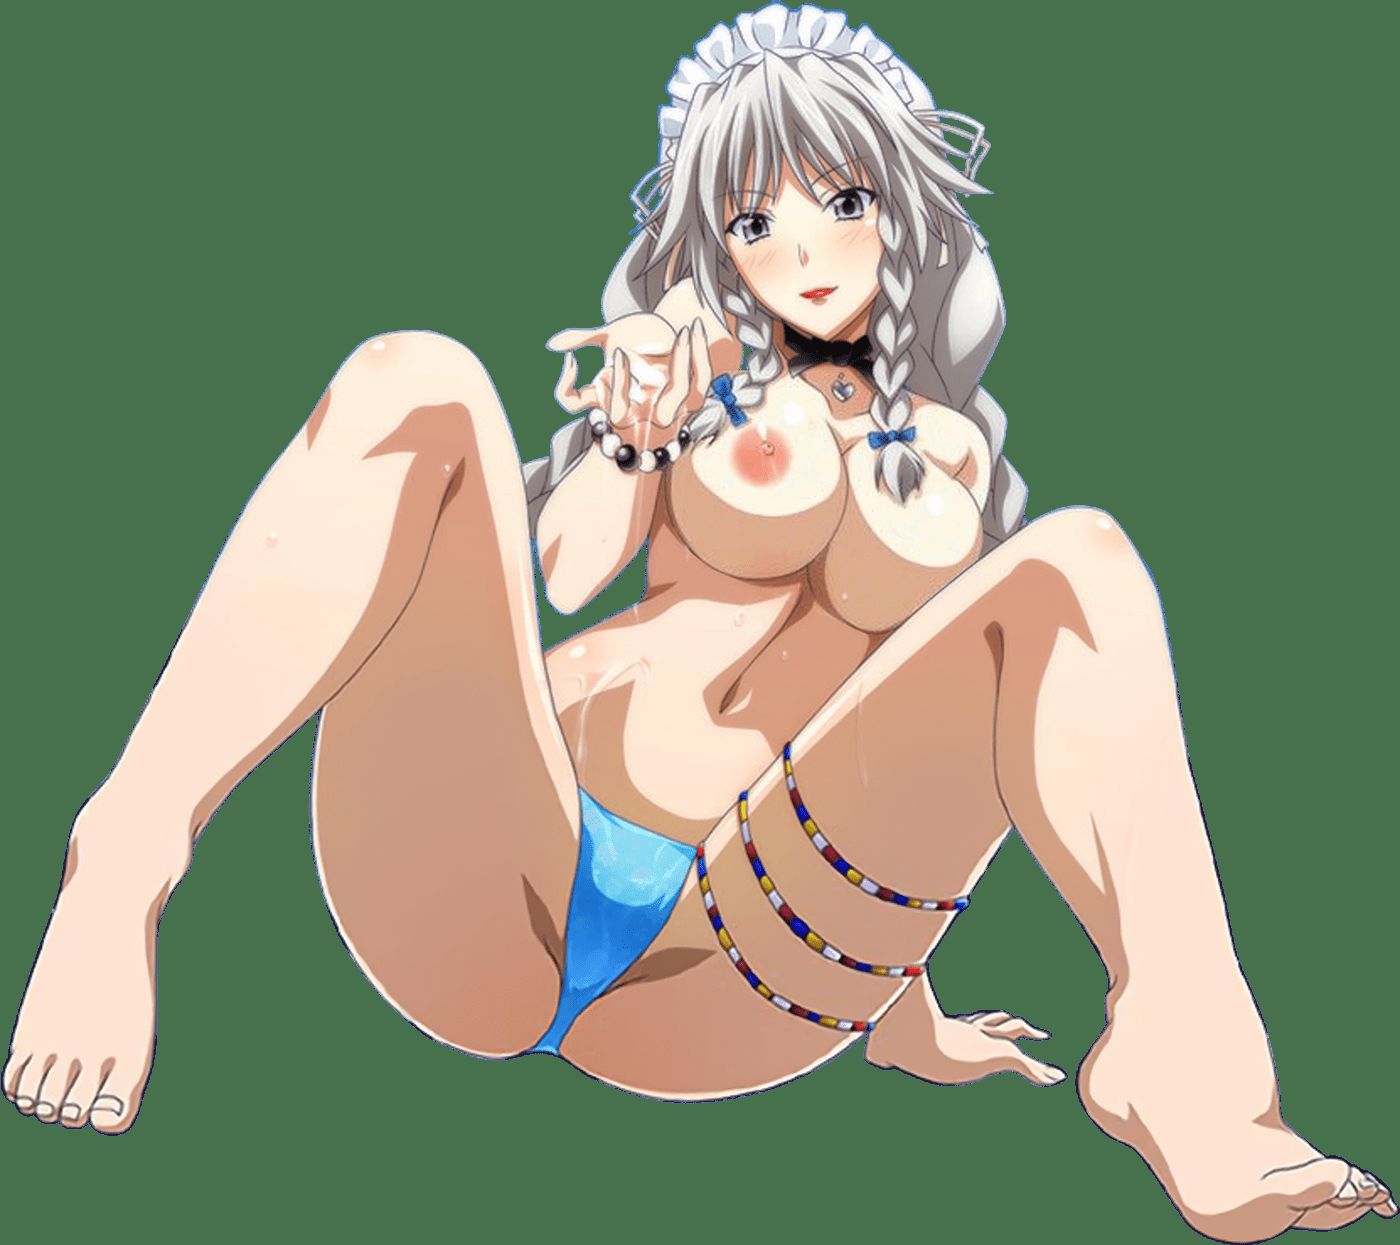 [Anime character material] png background of animated characters erotic images that 118 6